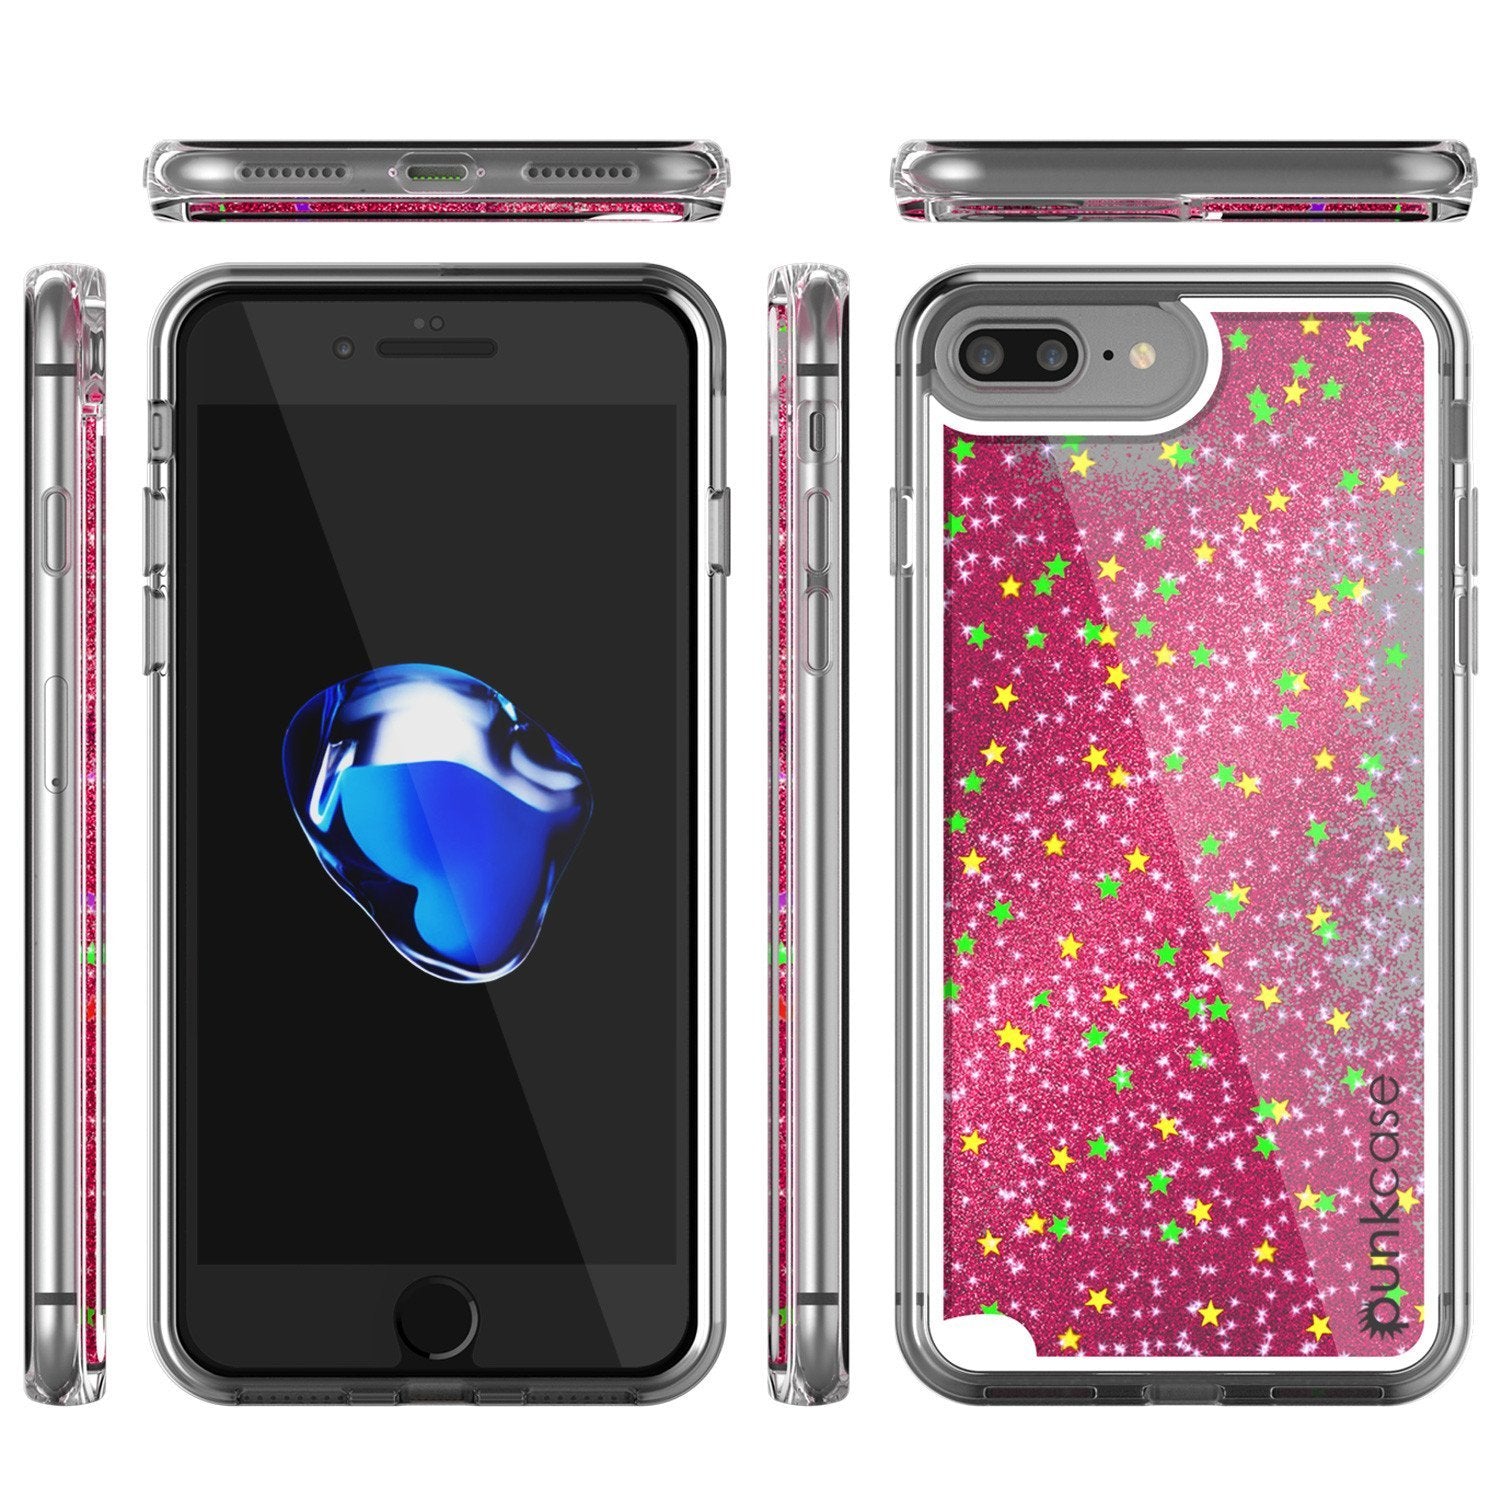 iPhone 8+ Plus Case, Punkcase Liquid Pink, Floating Glitter Cover Series